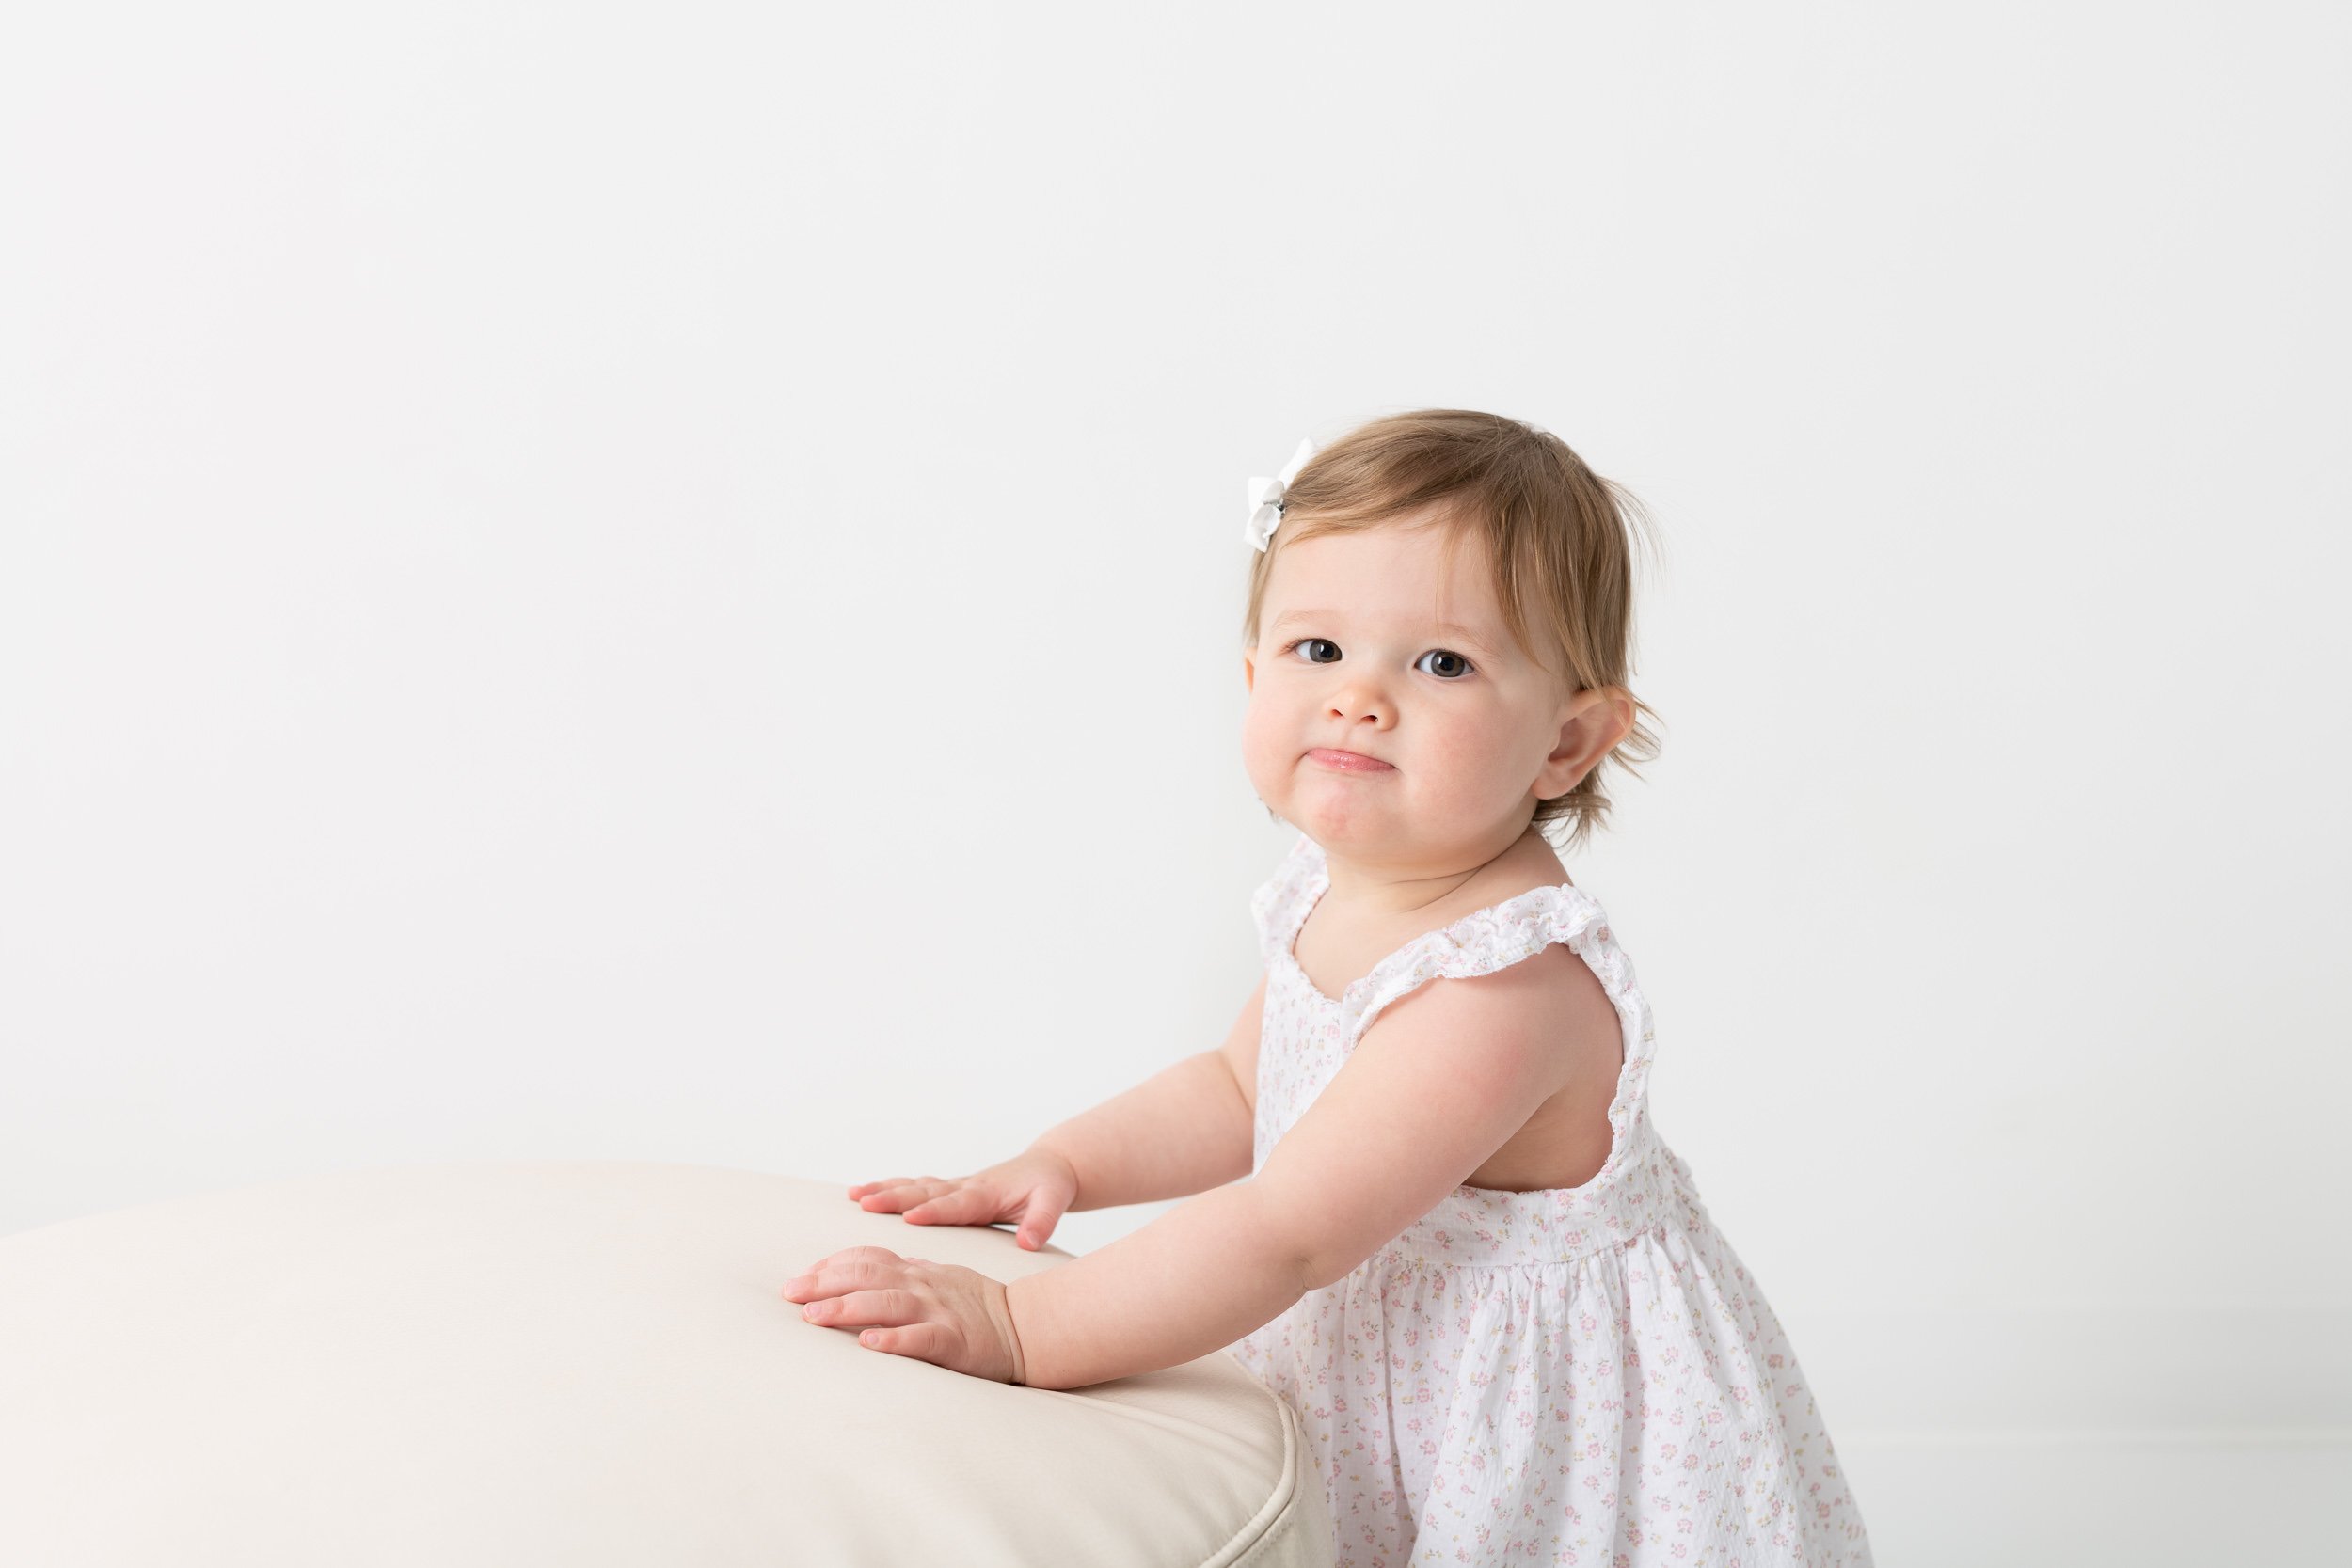  A first birthday portrait was taken of a little girl in a white dress by Nicole Hawkins Photography. little girl silly faces #NicoleHawkinsPhotography #NicoleHawkinsBabies #studiochildren #firstbirthday #studiophotography #girlsbirthdayportraits 